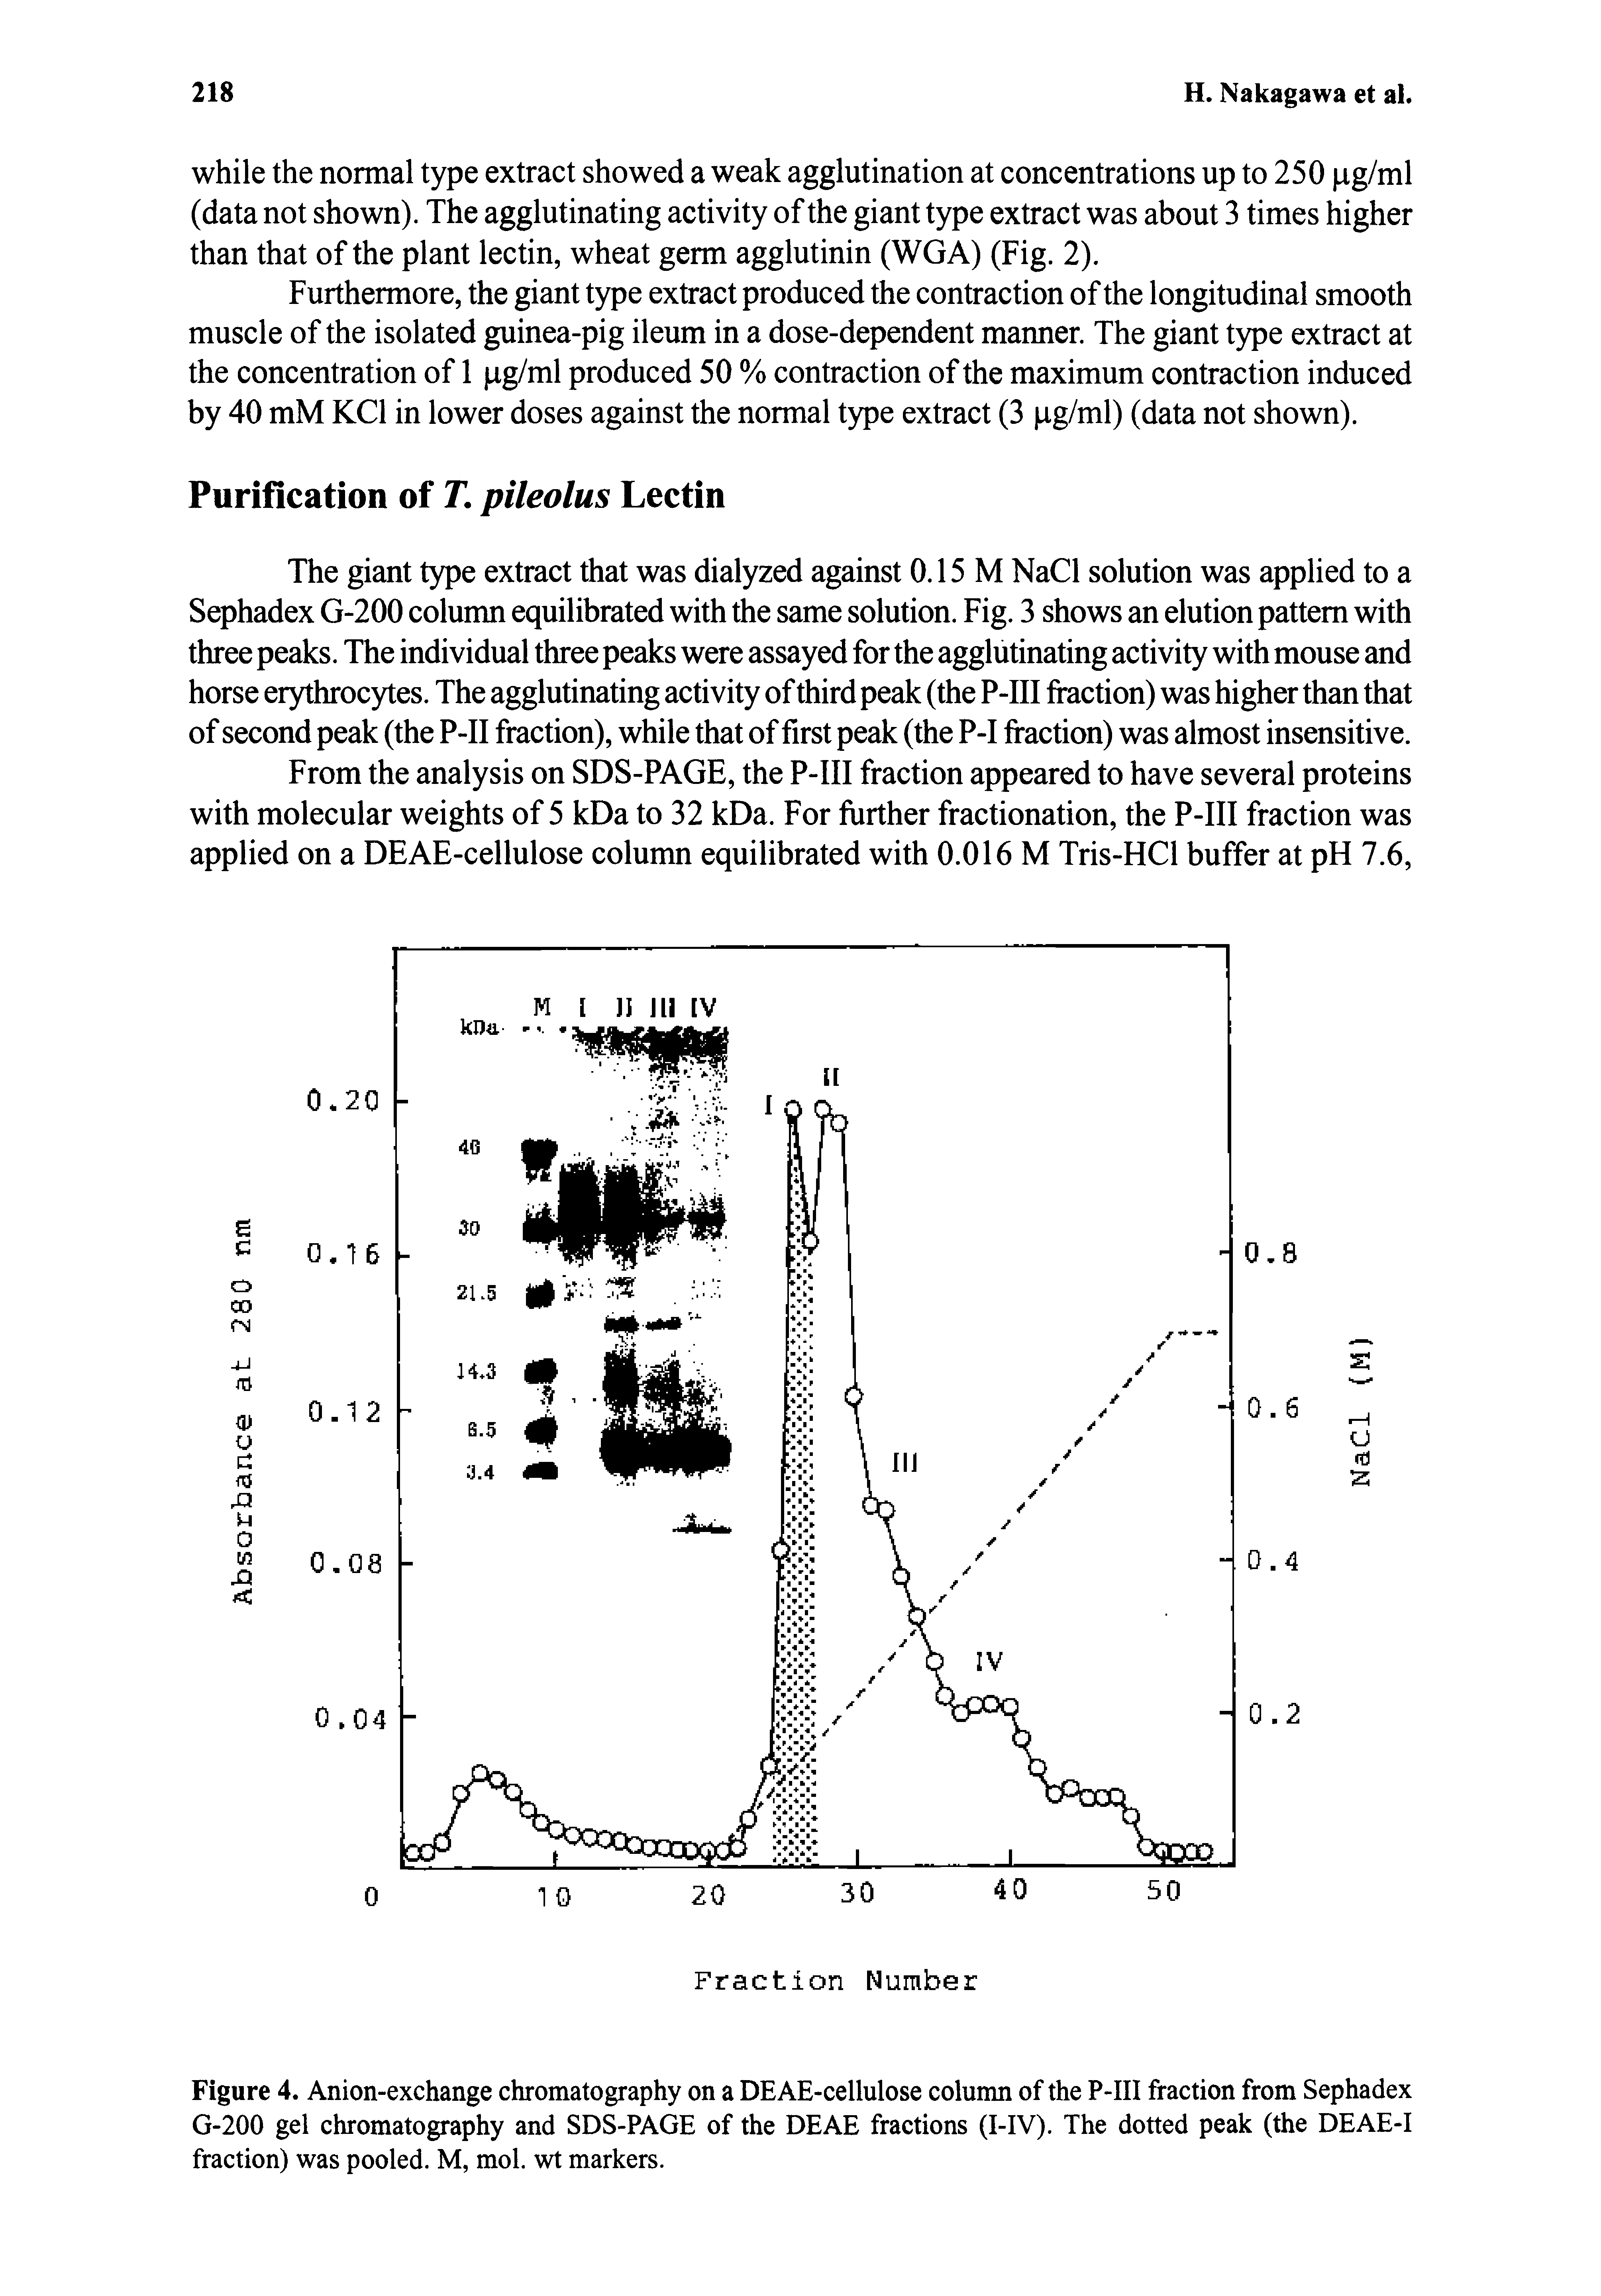 Figure 4. Anion-exchange chromatography on a DEAE-cellulose column of the P-III fraction from Sephadex G-200 gel chromatography and SDS-PAGE of the DEAE fractions (I-IV). The dotted peak (the DEAE-I fraction) was pooled. M, mol. wt markers.